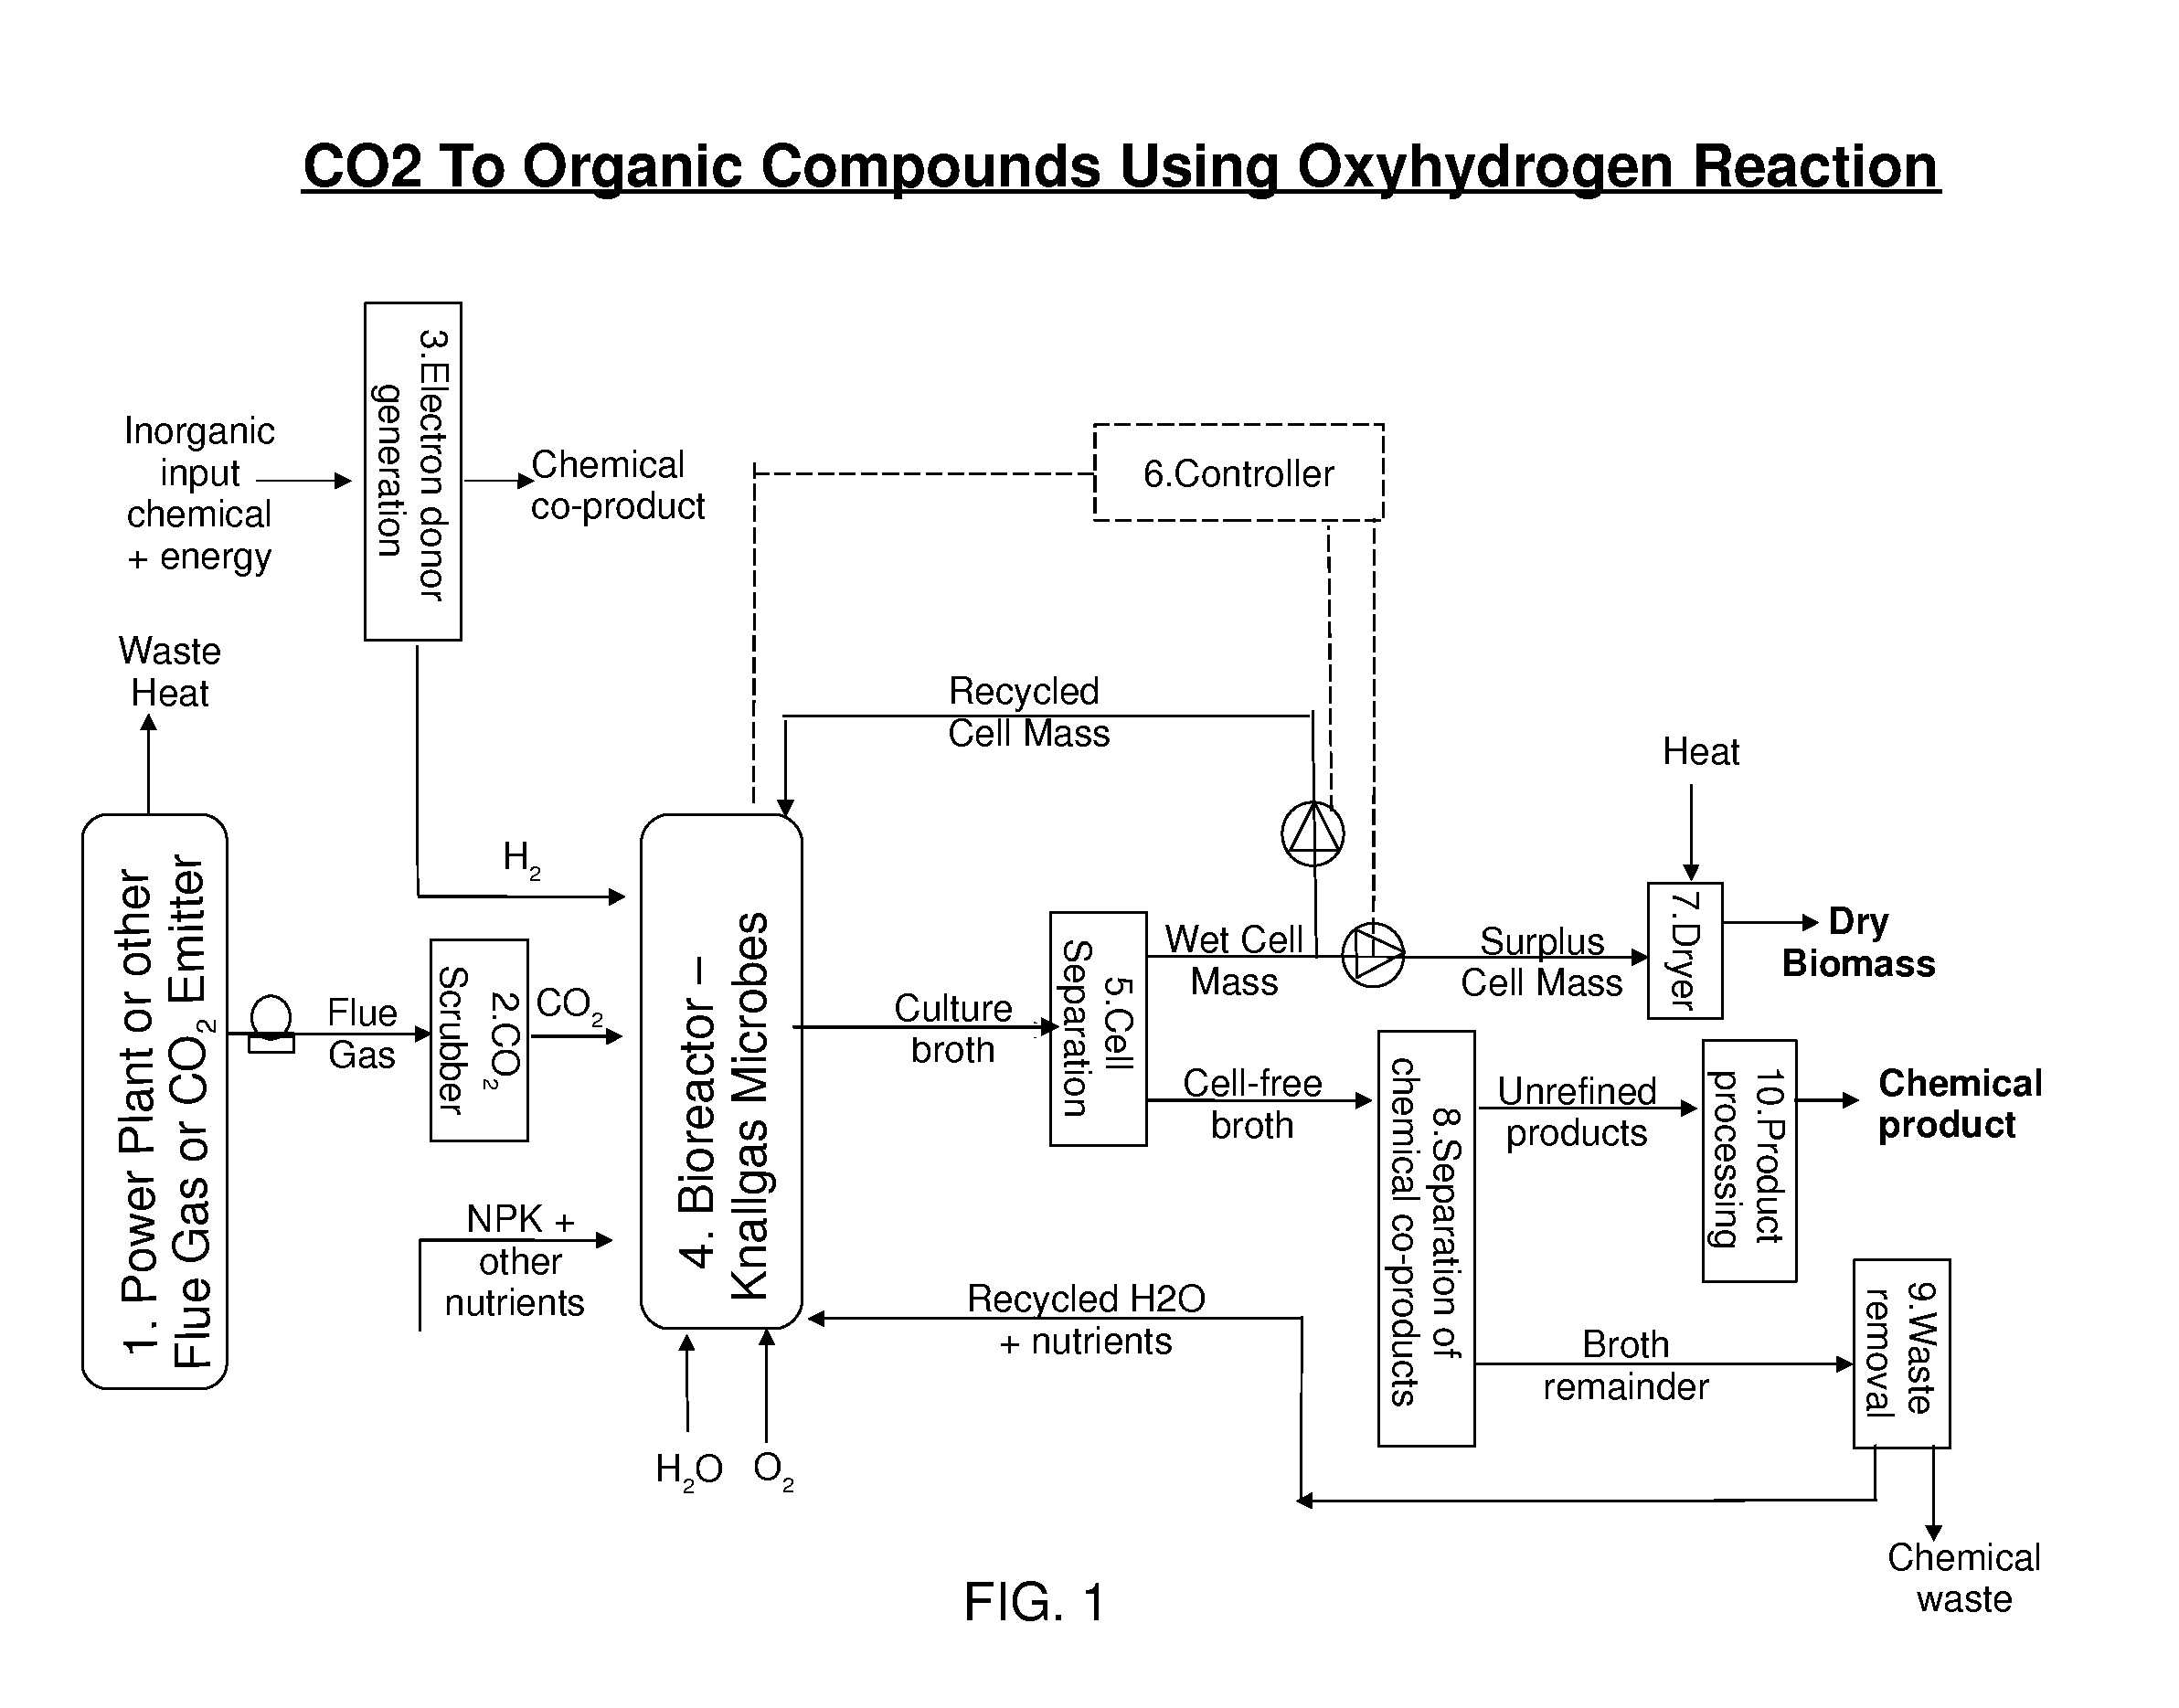 Use of oxyhydrogen microorganisms for non-photosynthetic carbon capture and conversion of inorganic and/or c1 carbon sources into useful organic compounds